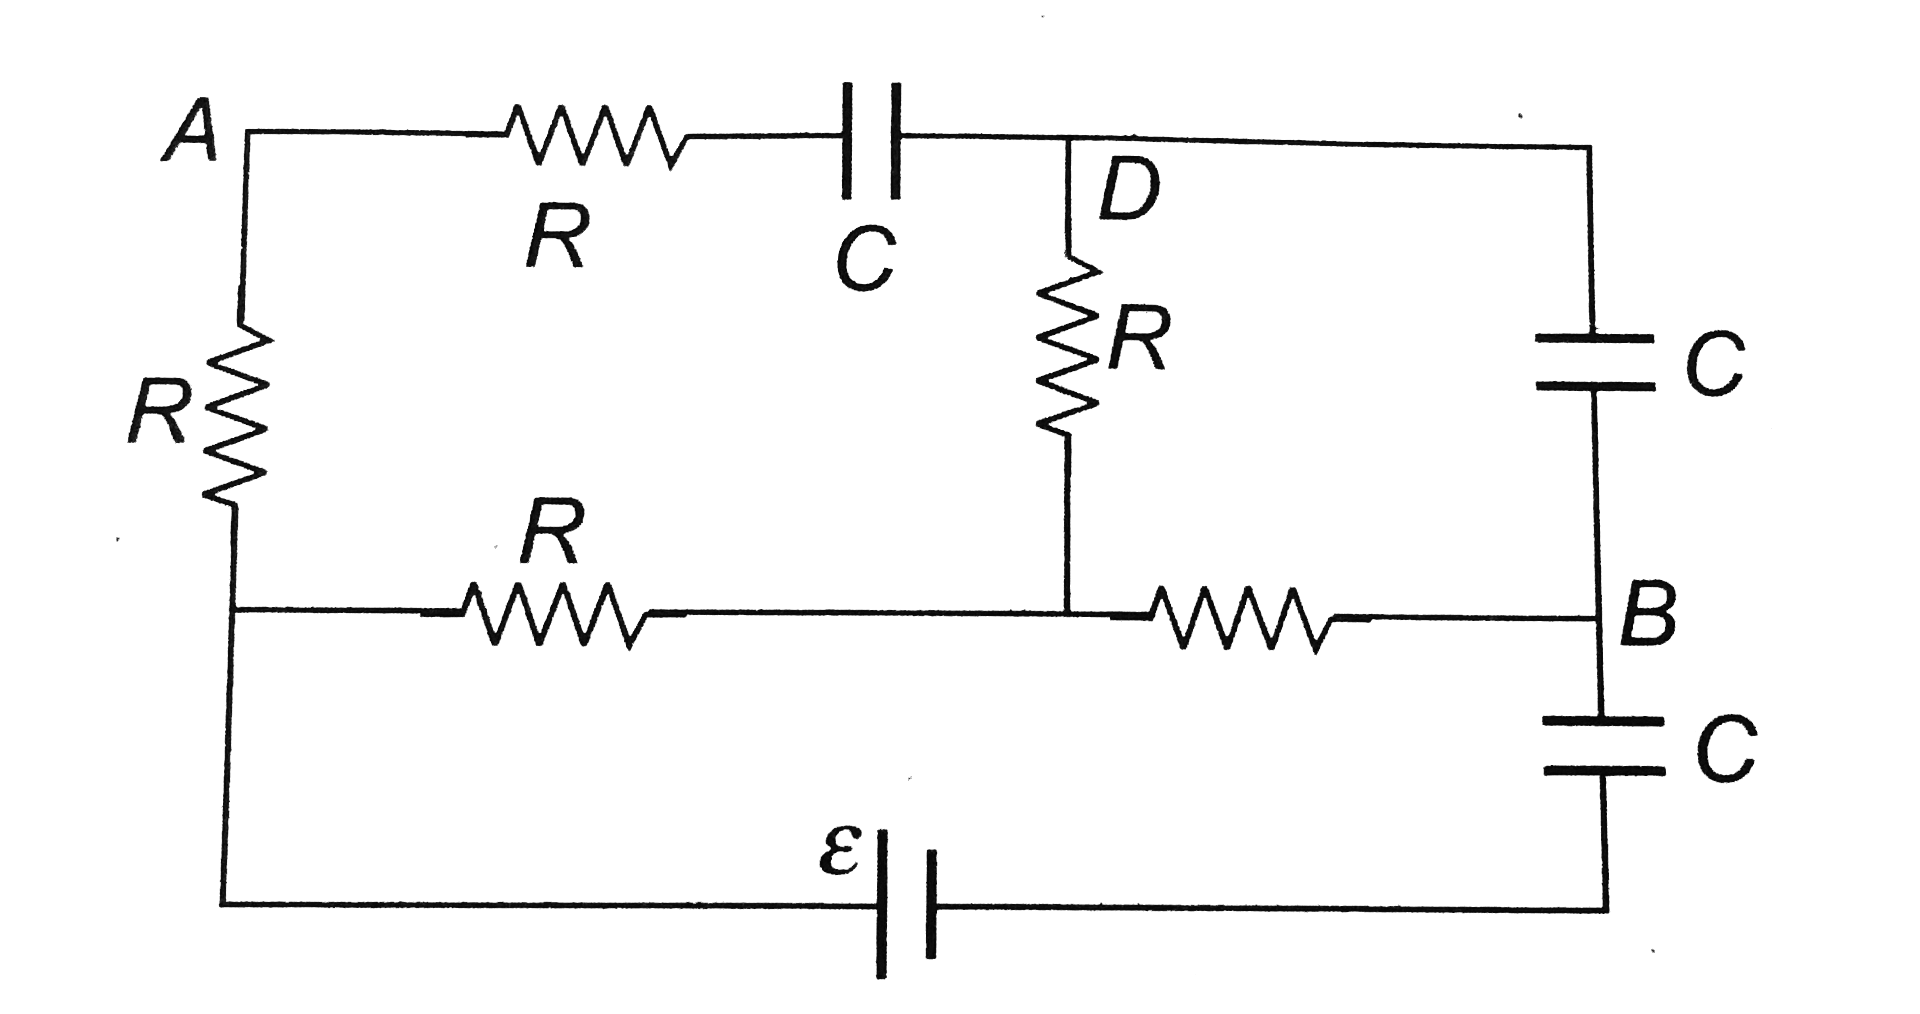 Consider the circuit shown in the figure. Find the charge on capacitor C between A and D in steady state.